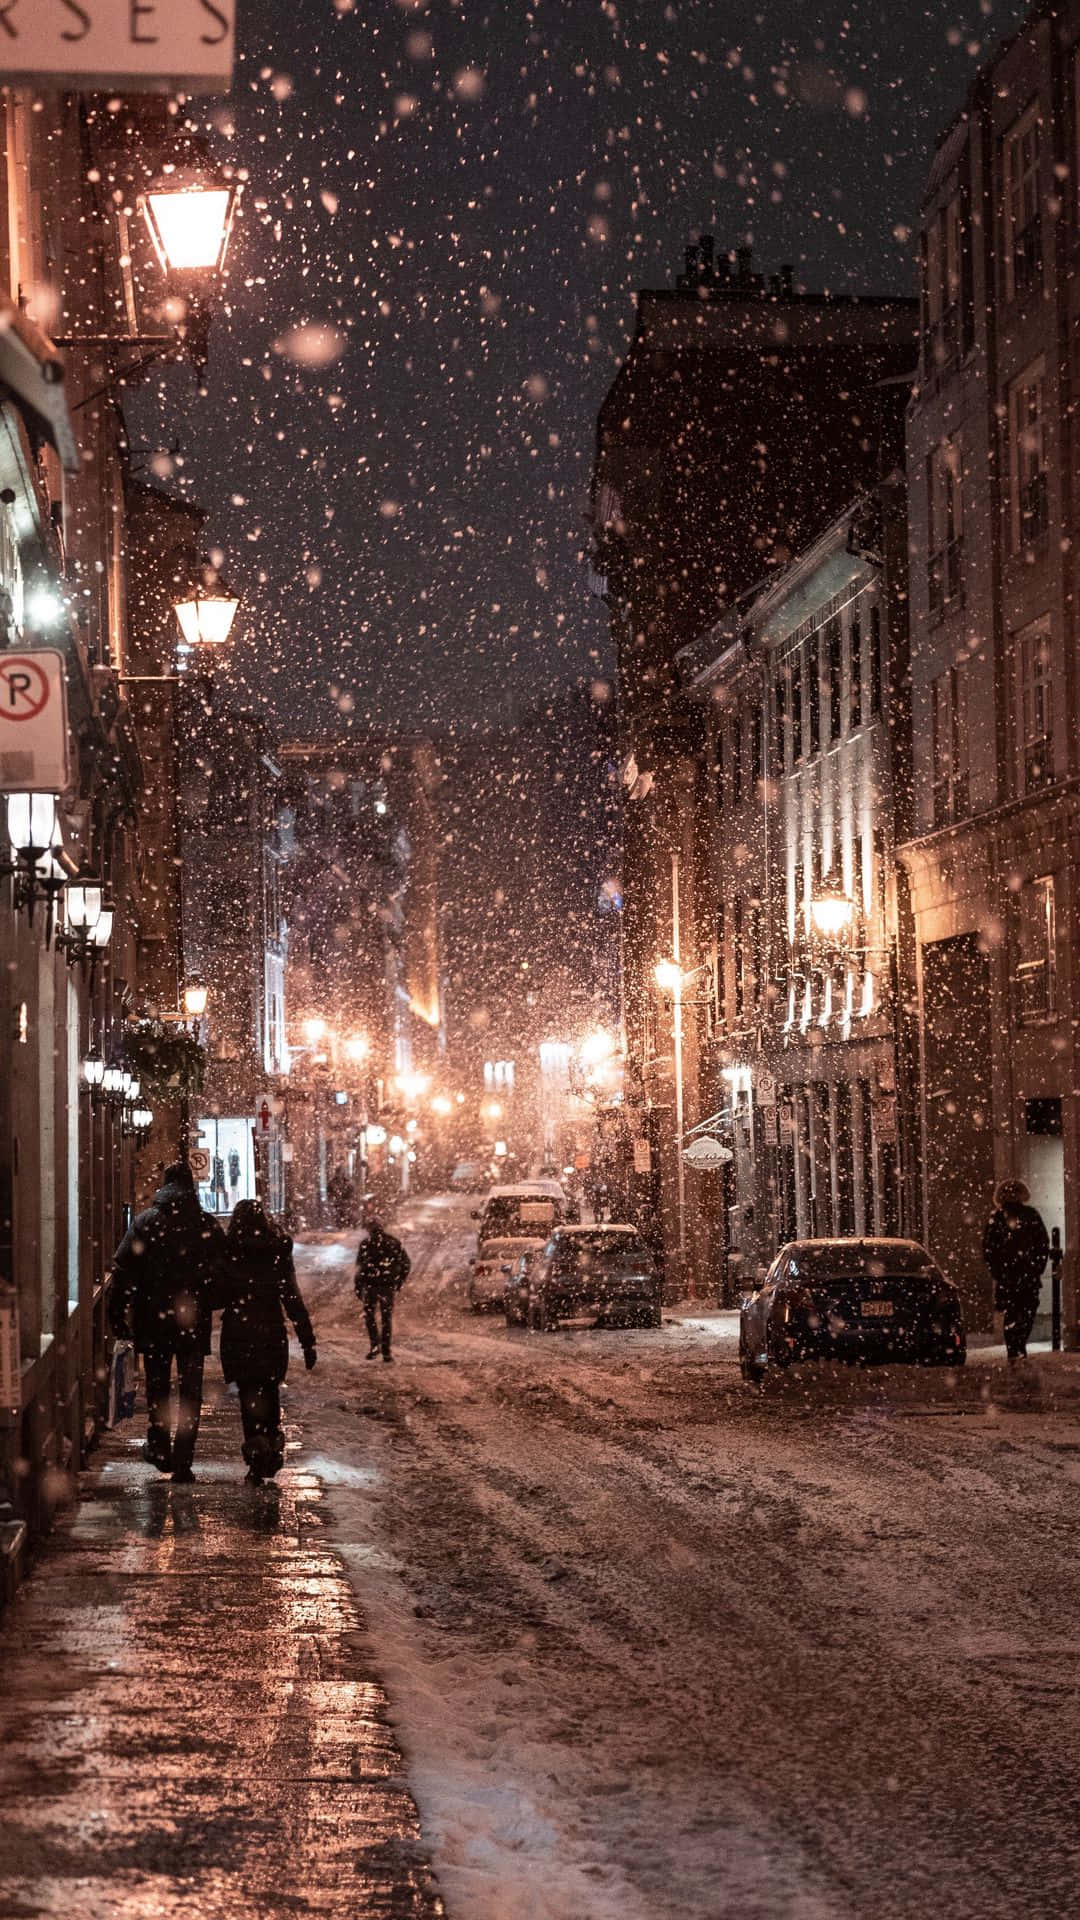 People Walking With Snow Falling Wallpaper